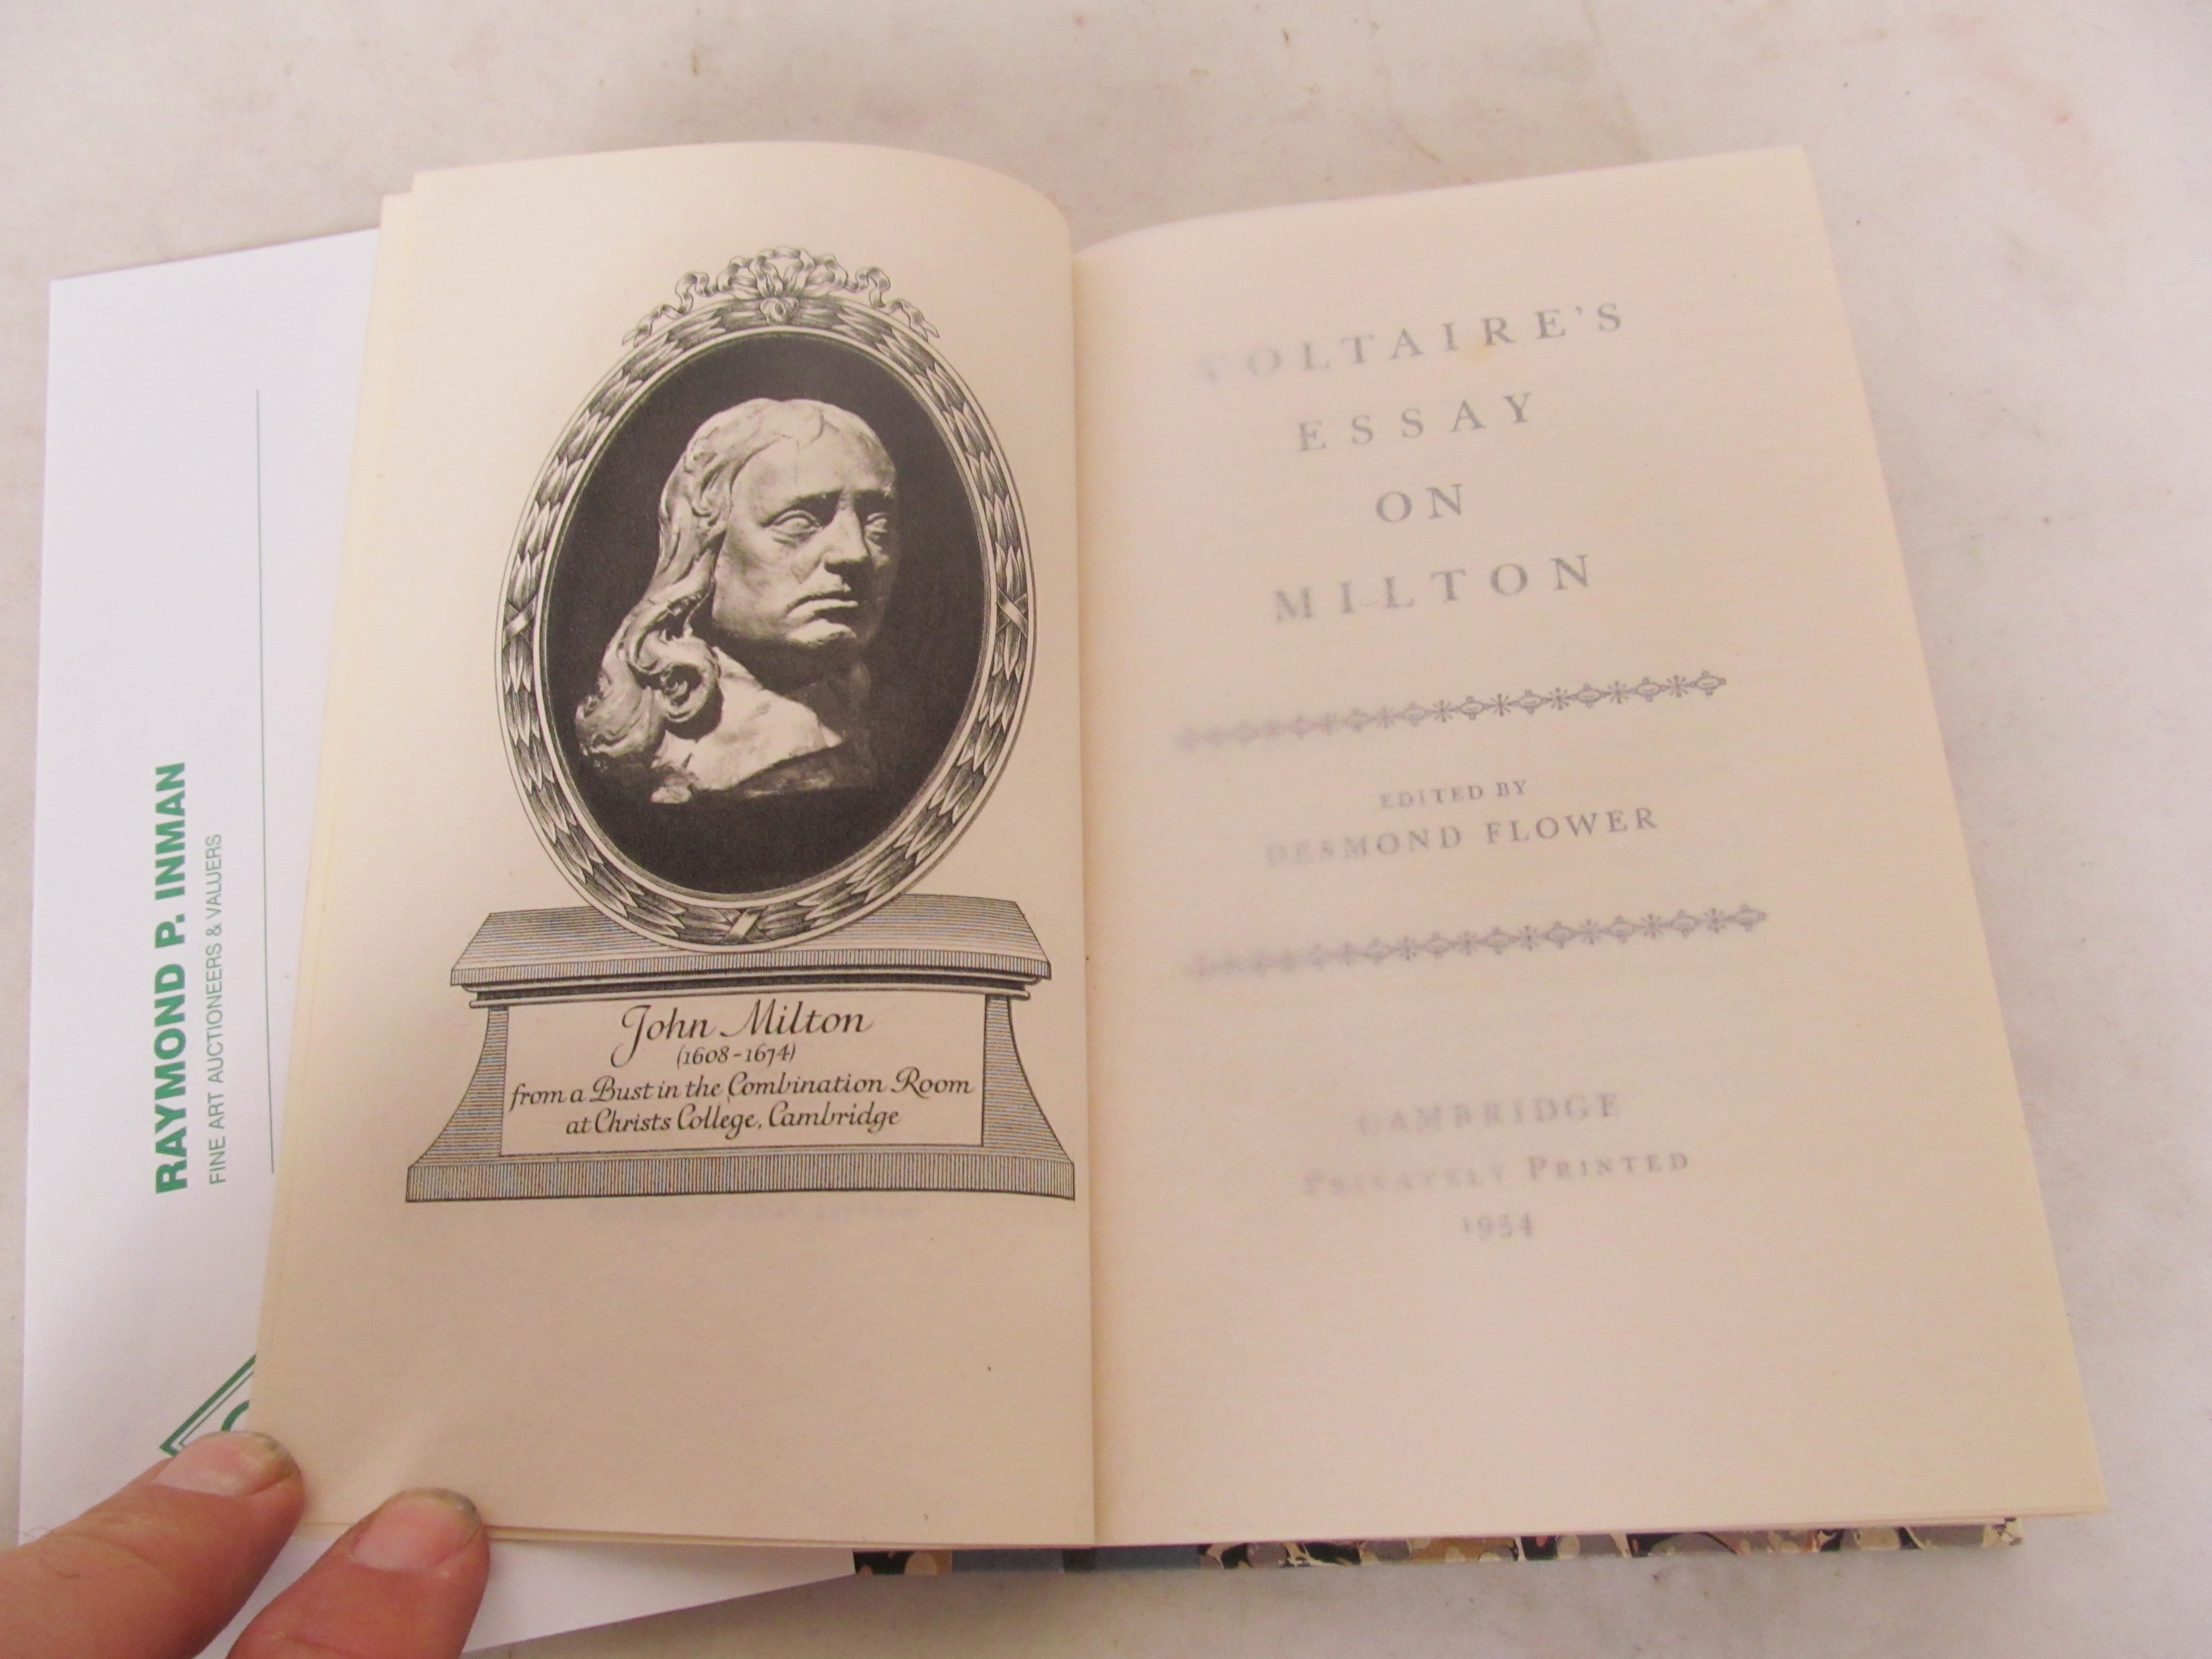 Voltaires Essay on Milton edited by Desmond Flower privately printed 1954 Cambridge with marbled